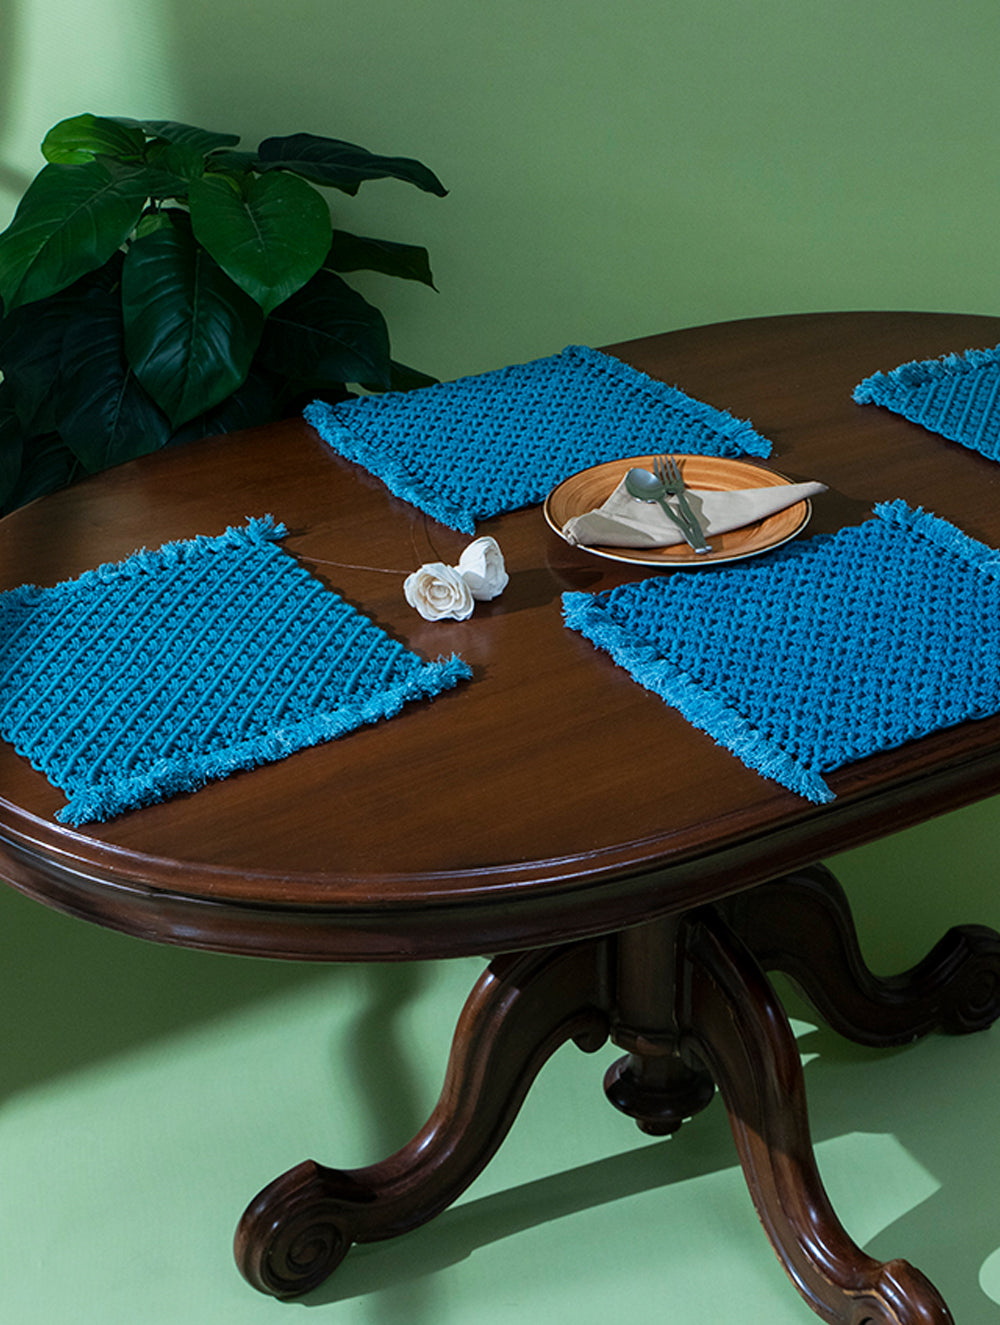 Load image into Gallery viewer, Jewel Handknotted Macramé Table Mats - Teal Blue (Set of 4)